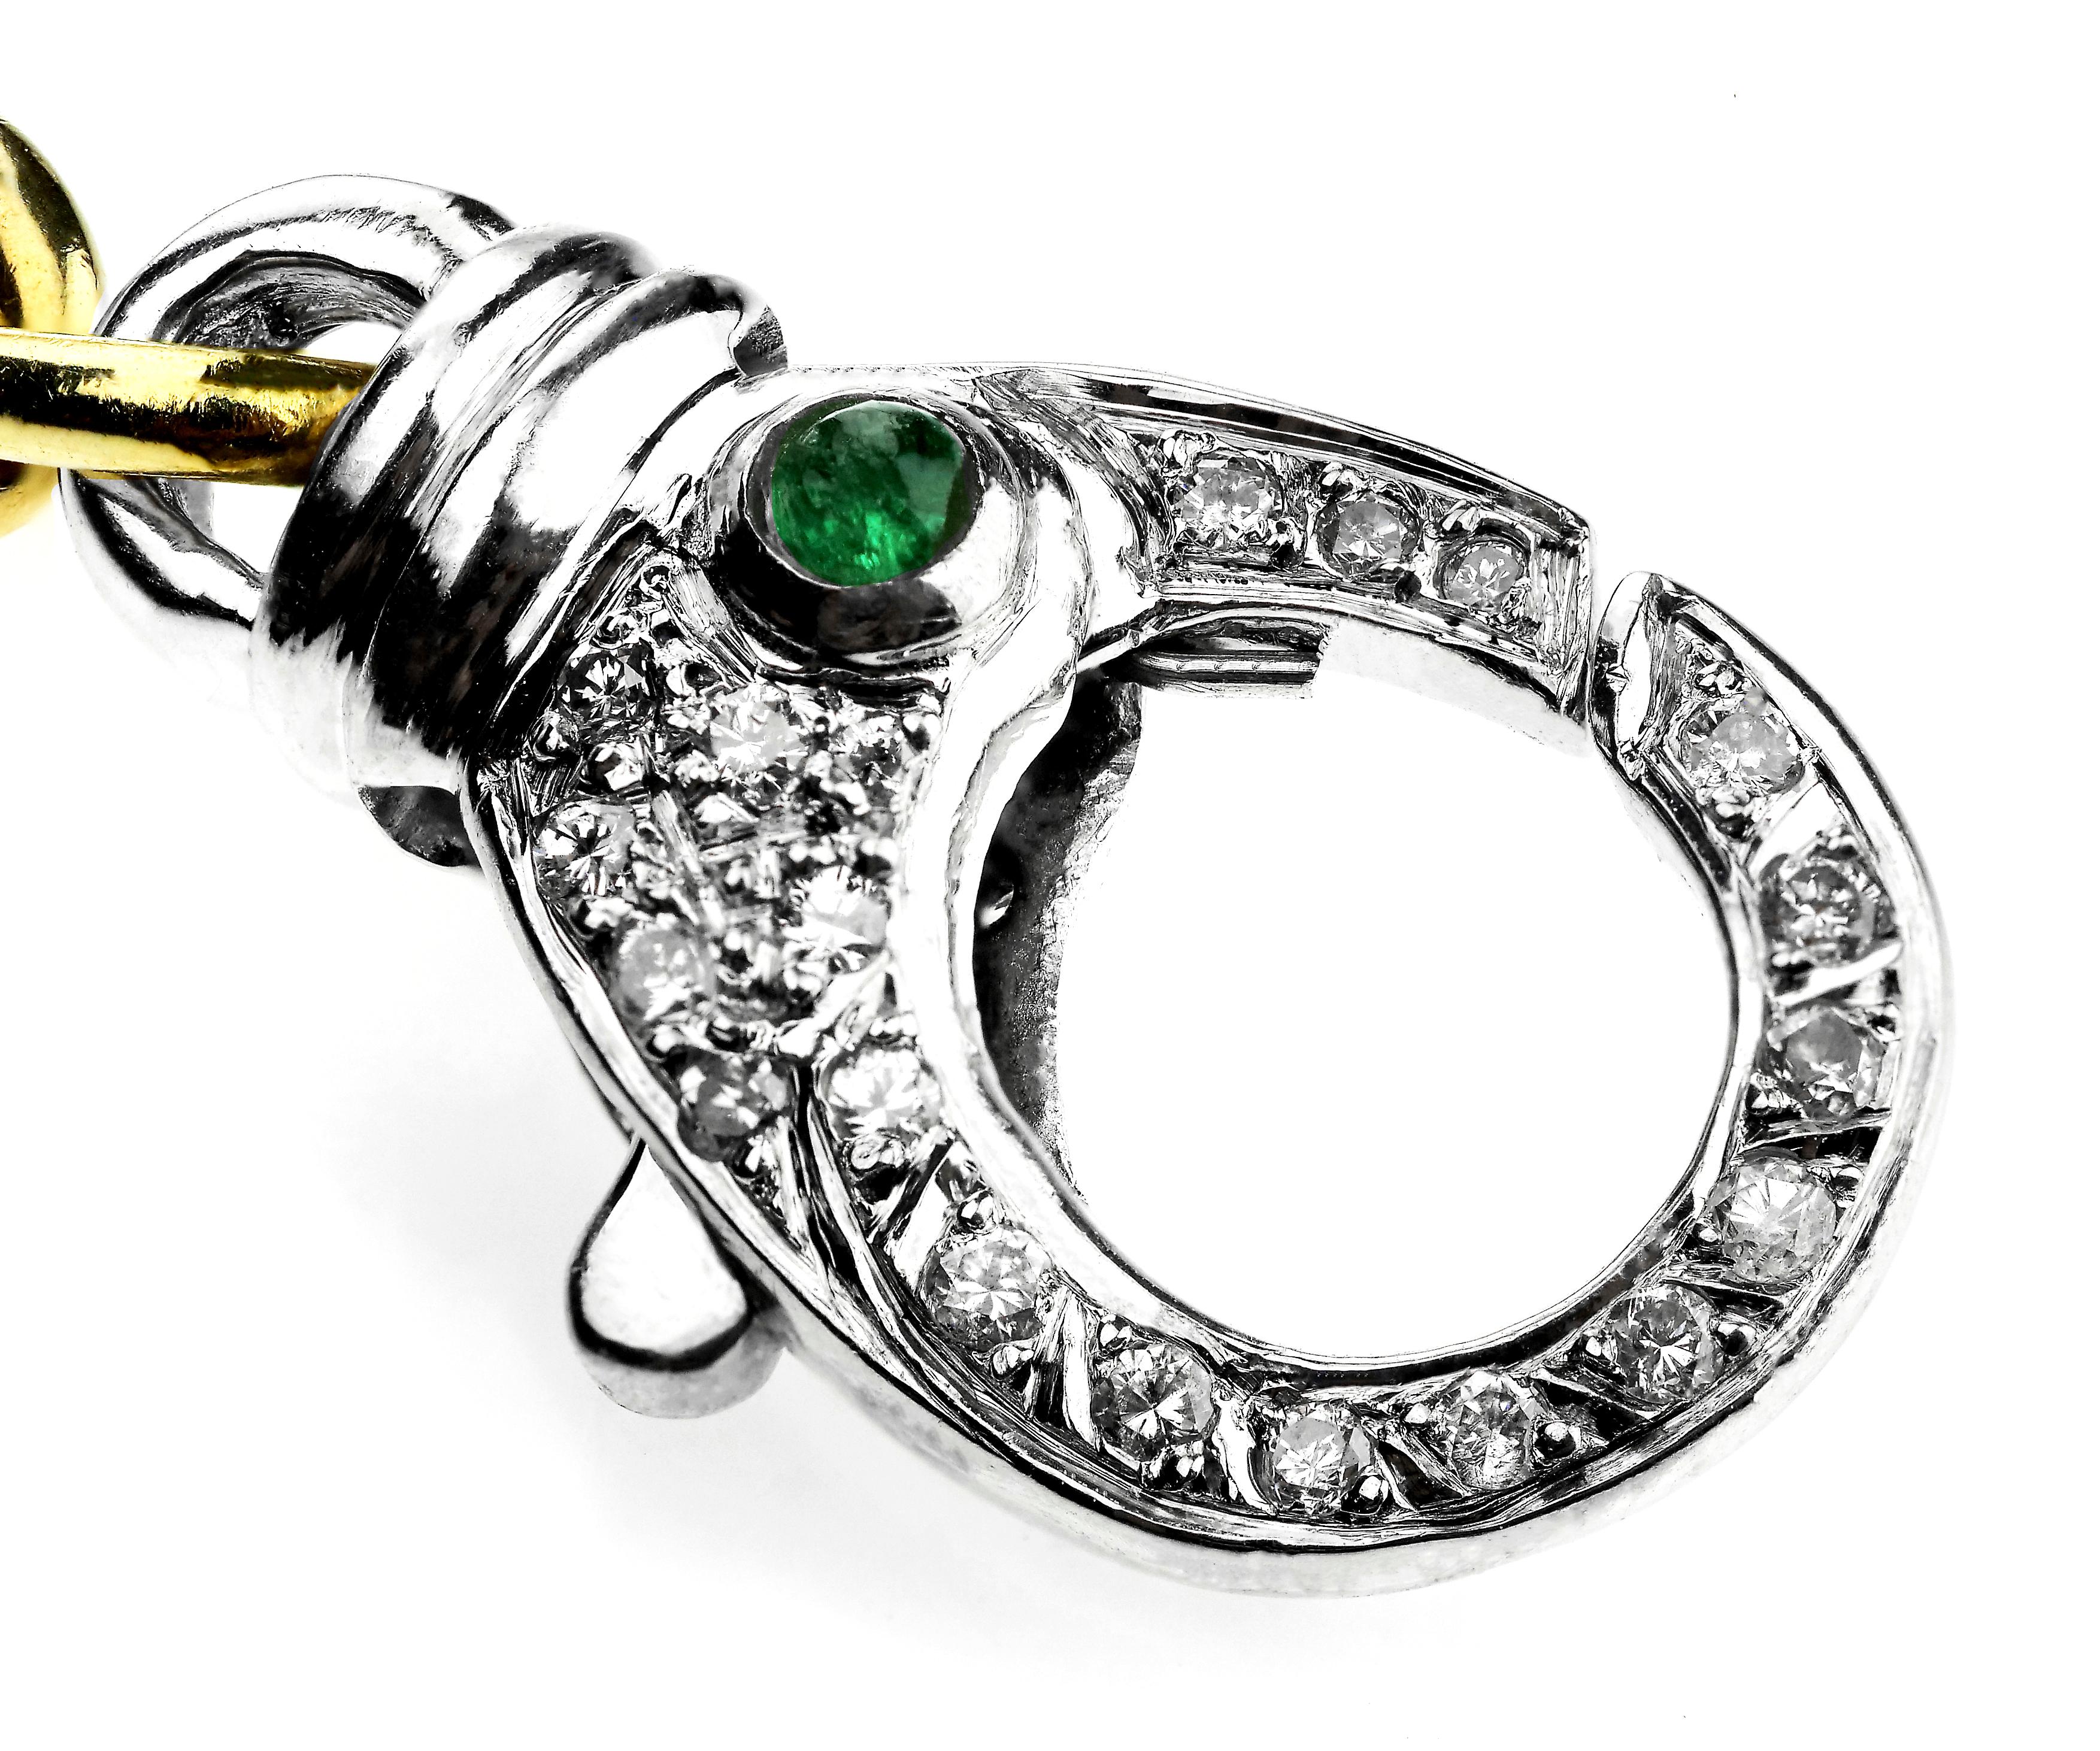 Women's or Men's Gold Chain, 18 Carat Yellow Gold Oval Link, Diamond Sapphire & Emerald Clasp